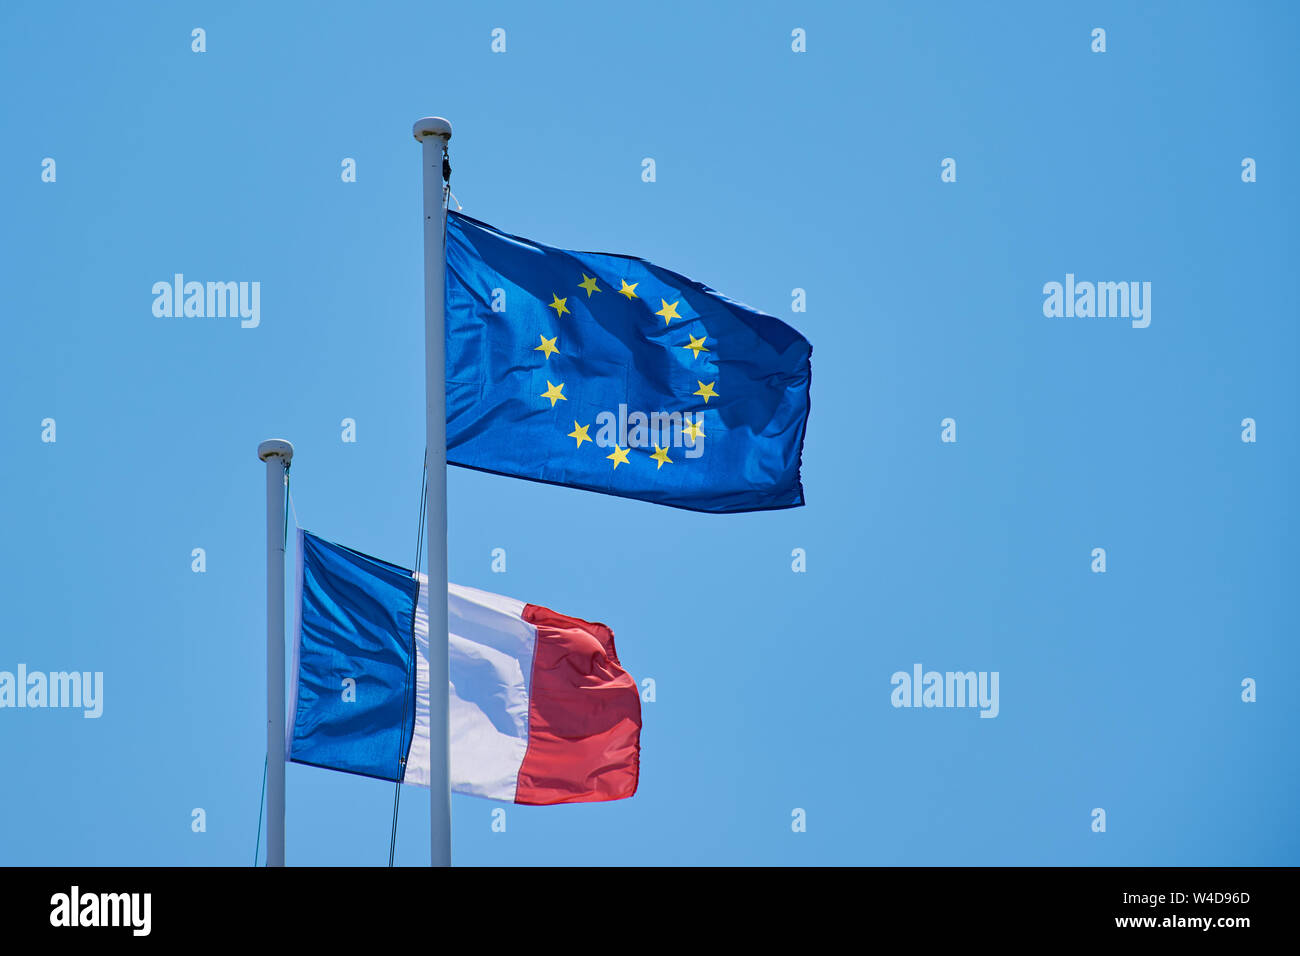 waving European flag and French flag against blue cloudless sky Stock Photo